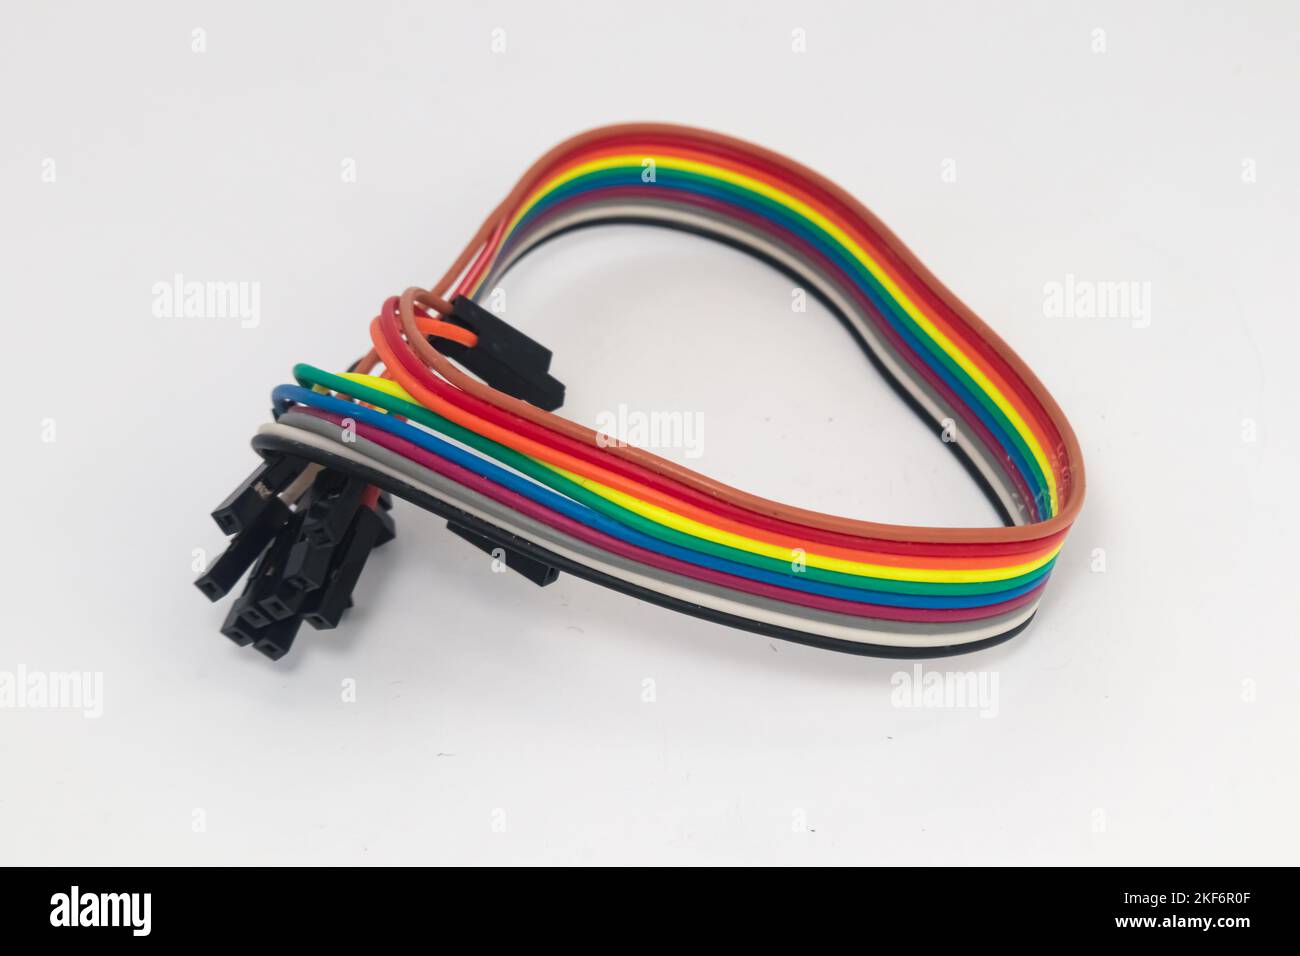 Rainbow cable with female to female connector as a jumper for DIY materials. Stock Photo